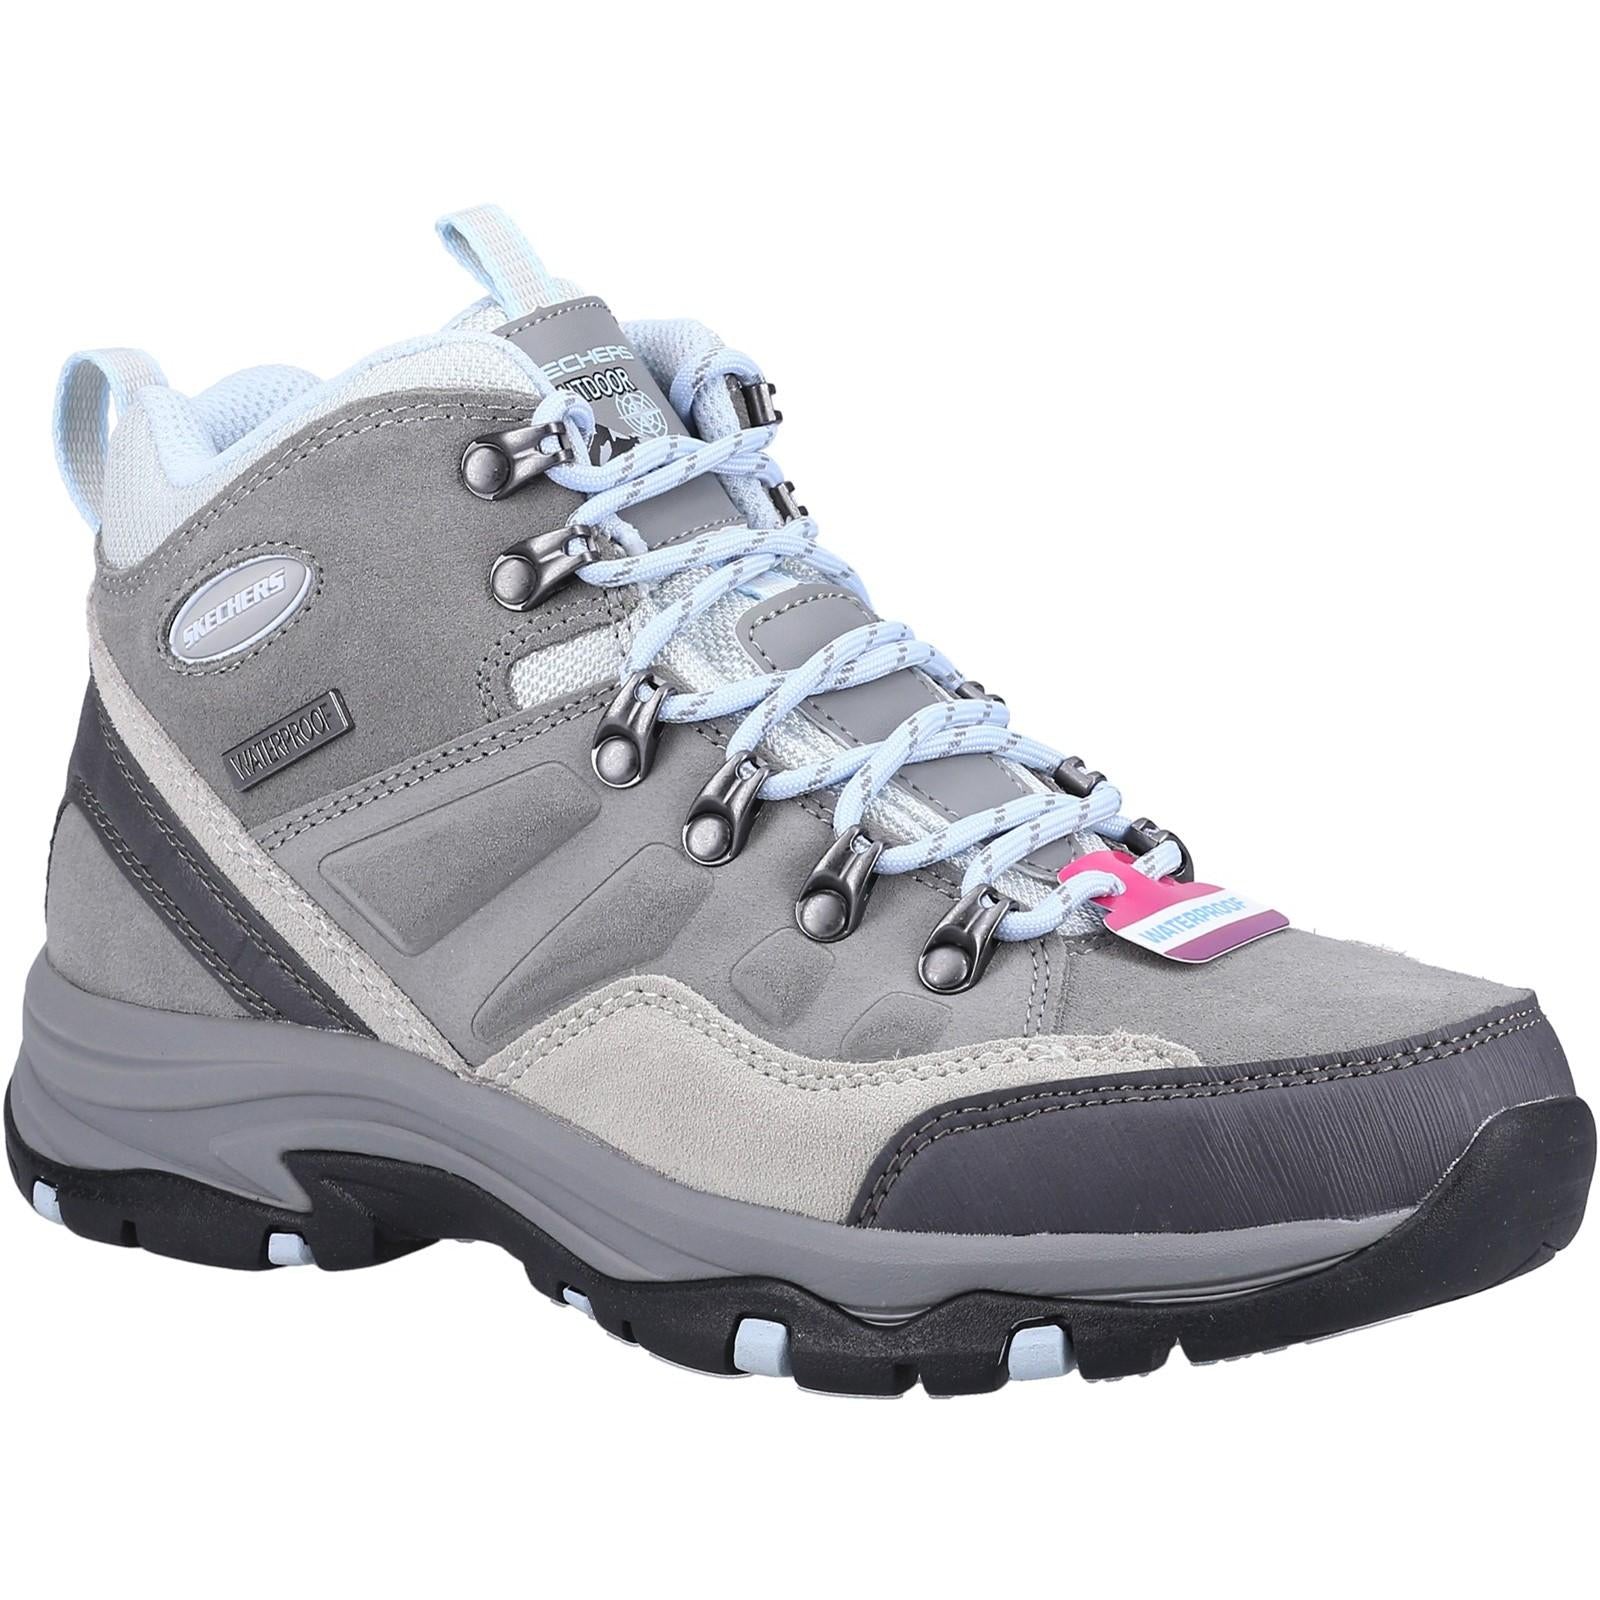 Skechers Trego Rocky Mountain Hiking Boots